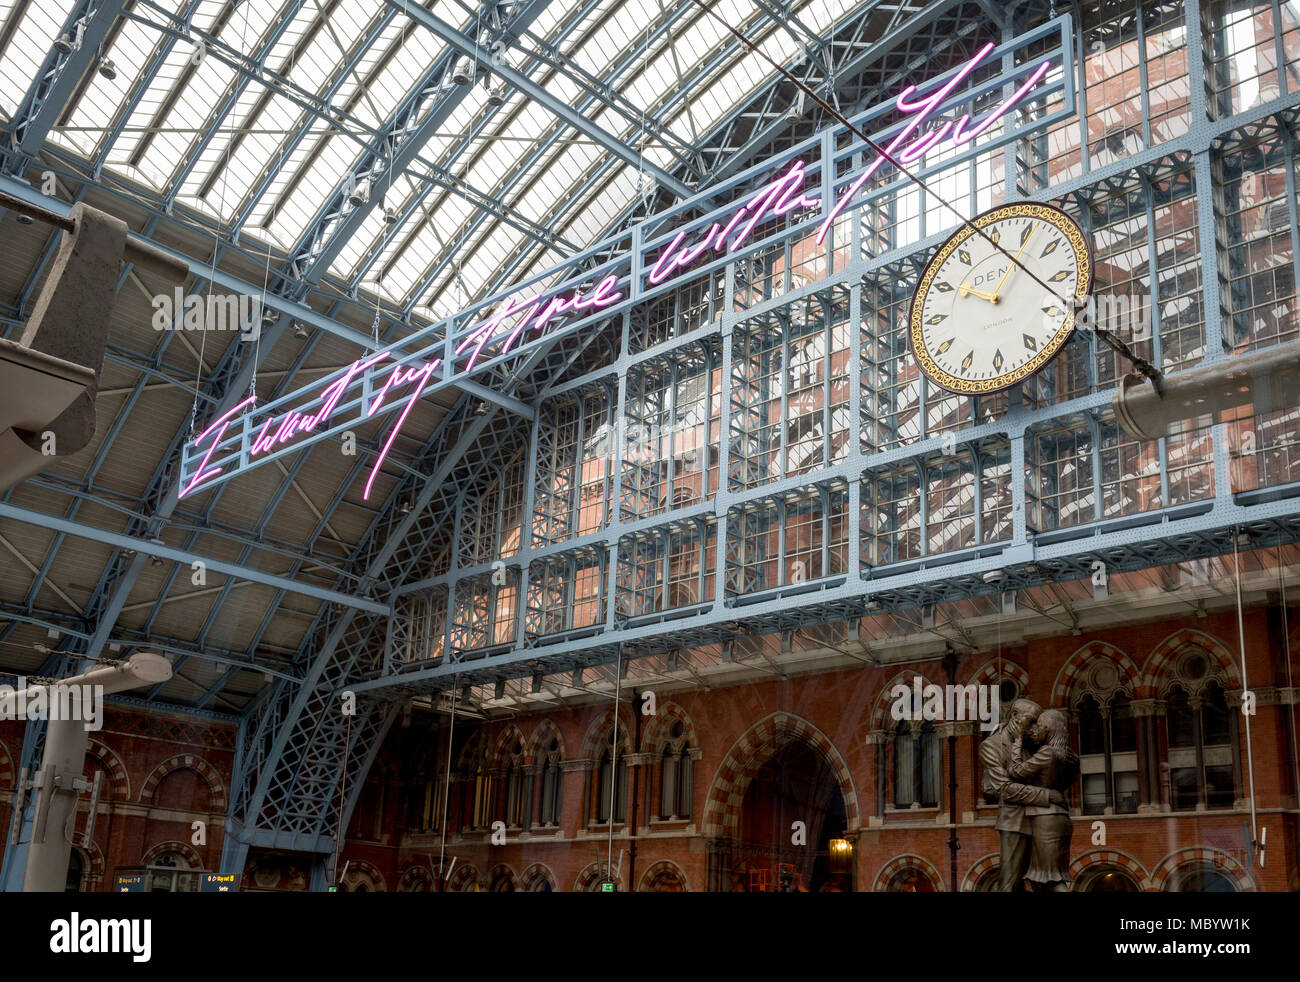 The new artwork entitled 'I Want My Time With You' by British (Britpop) artist Tracy Emin hangs over the main concourse at St. Pancras Station, on 10th April 2018, in London, England. In the sixth year of the Terrace Wires Commission - and in celebration of the 150th anniversary of St Pancras International and the 250th anniversary of the Royal Academy of Arts, at one of London's mainline station, the London hub for Eurostar - the 20 metre-long greeting to commuters reads 'I Want My Time With You' and Emin thinks that arriving by train and being met by a lover as they put their arms around the Stock Photo